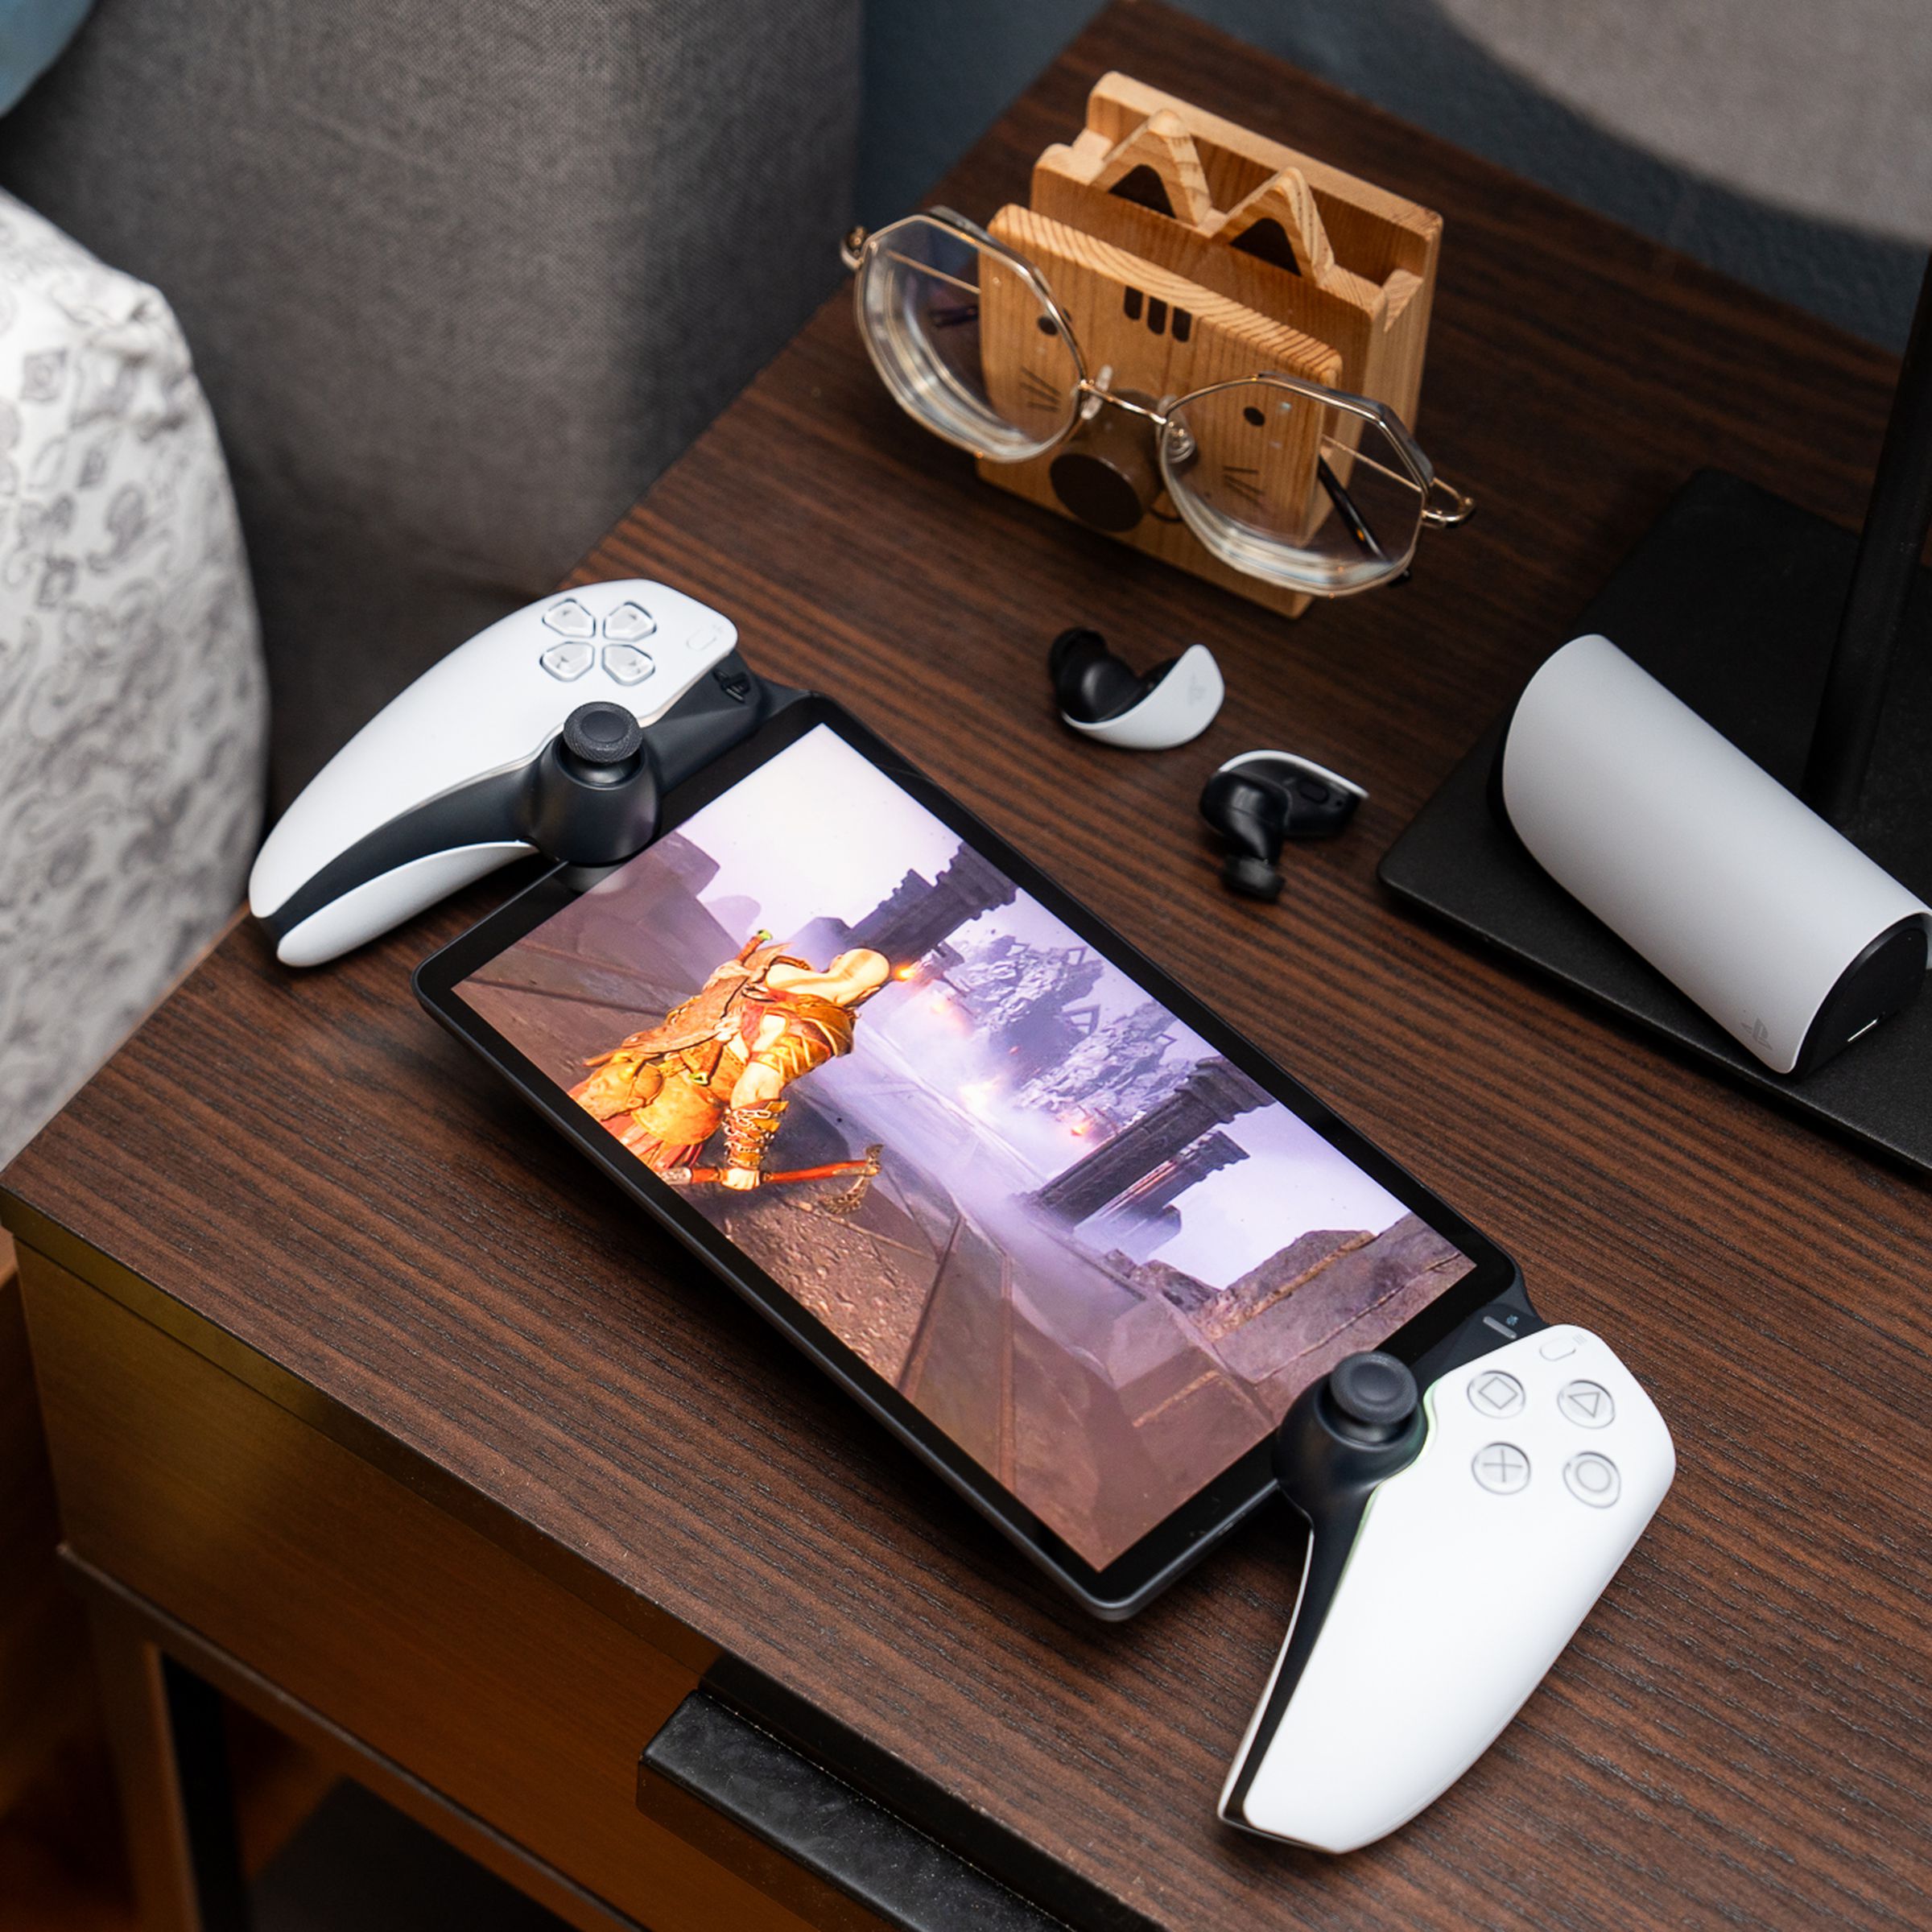 The PlayStation Portal sitting on a bedside table with a pair of earbuds. The handheld gaming device is streaming God of War: Ragnar?k off a PlayStation 5.